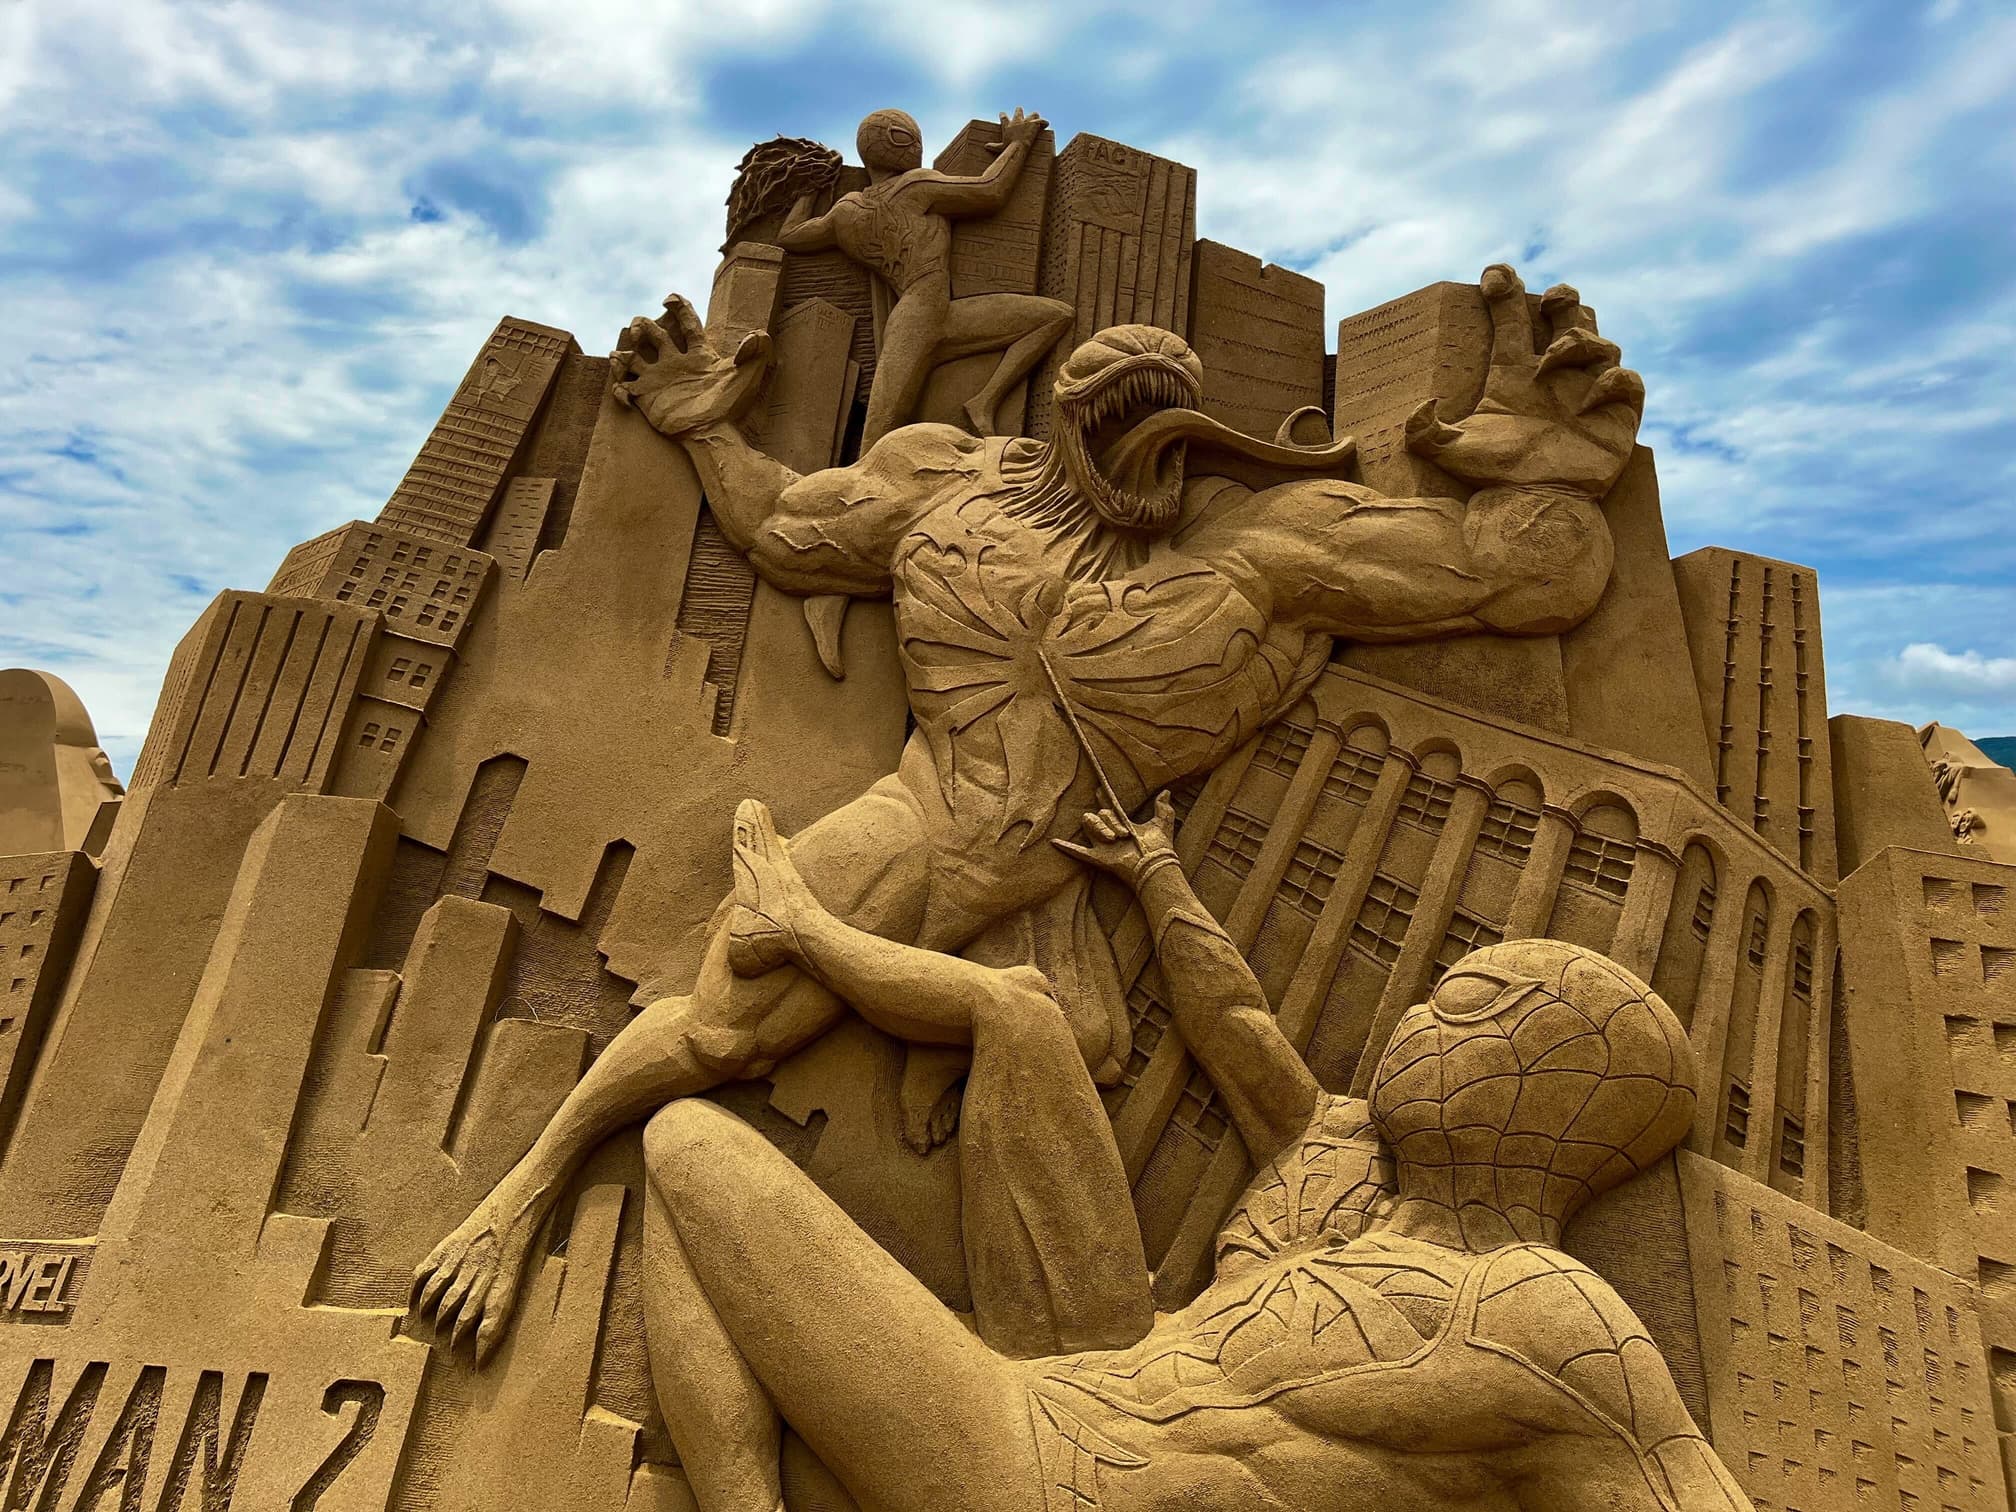 Marvel's Spider-Man 2 Comes to Life in Giant Sand Sculpture in Taiwan